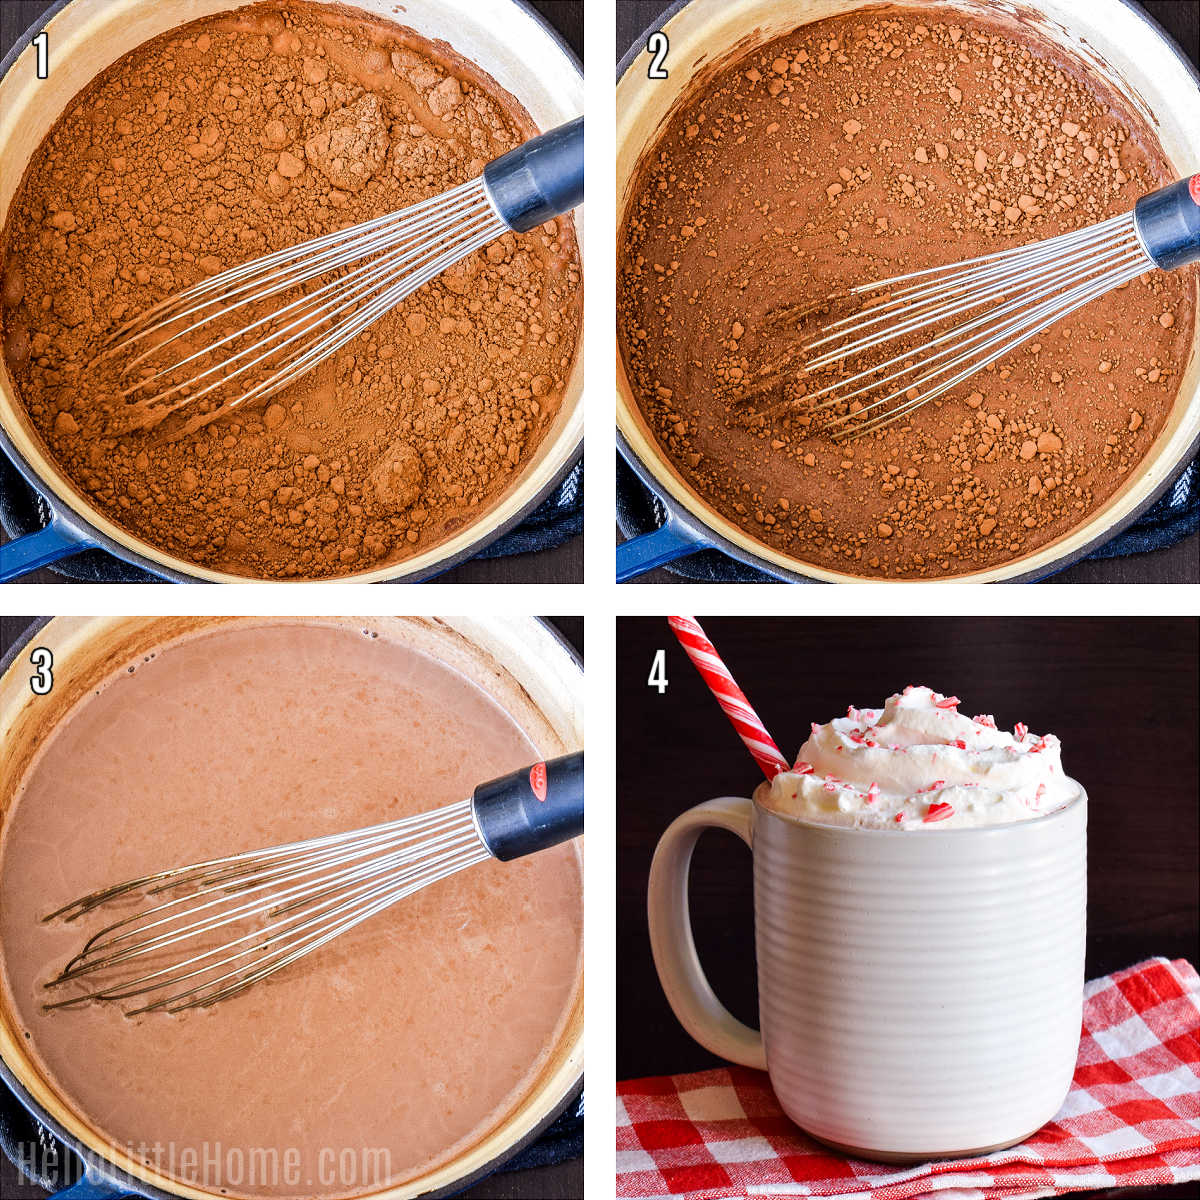 A photo collage showing how to make Peppermint Hot Chocolate step by step.